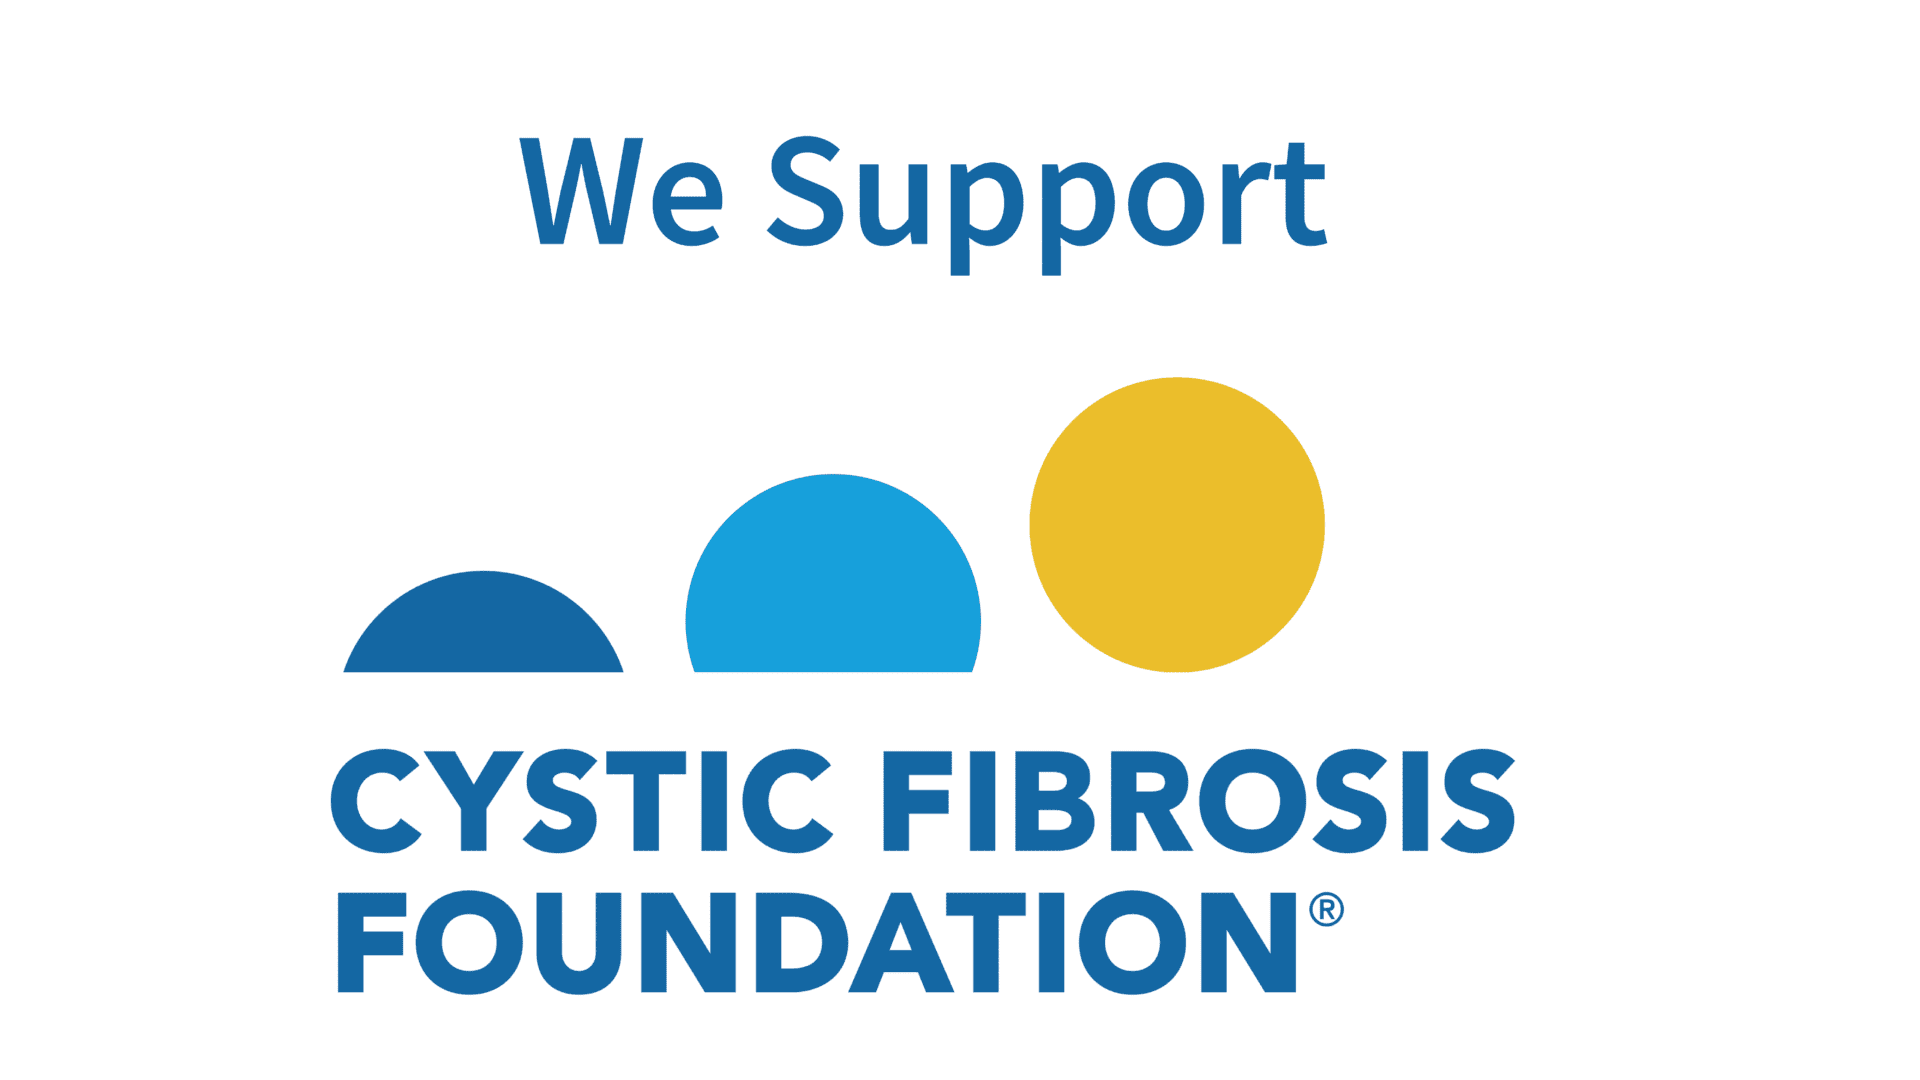 We Support the Cystic Fibrosis Foundation